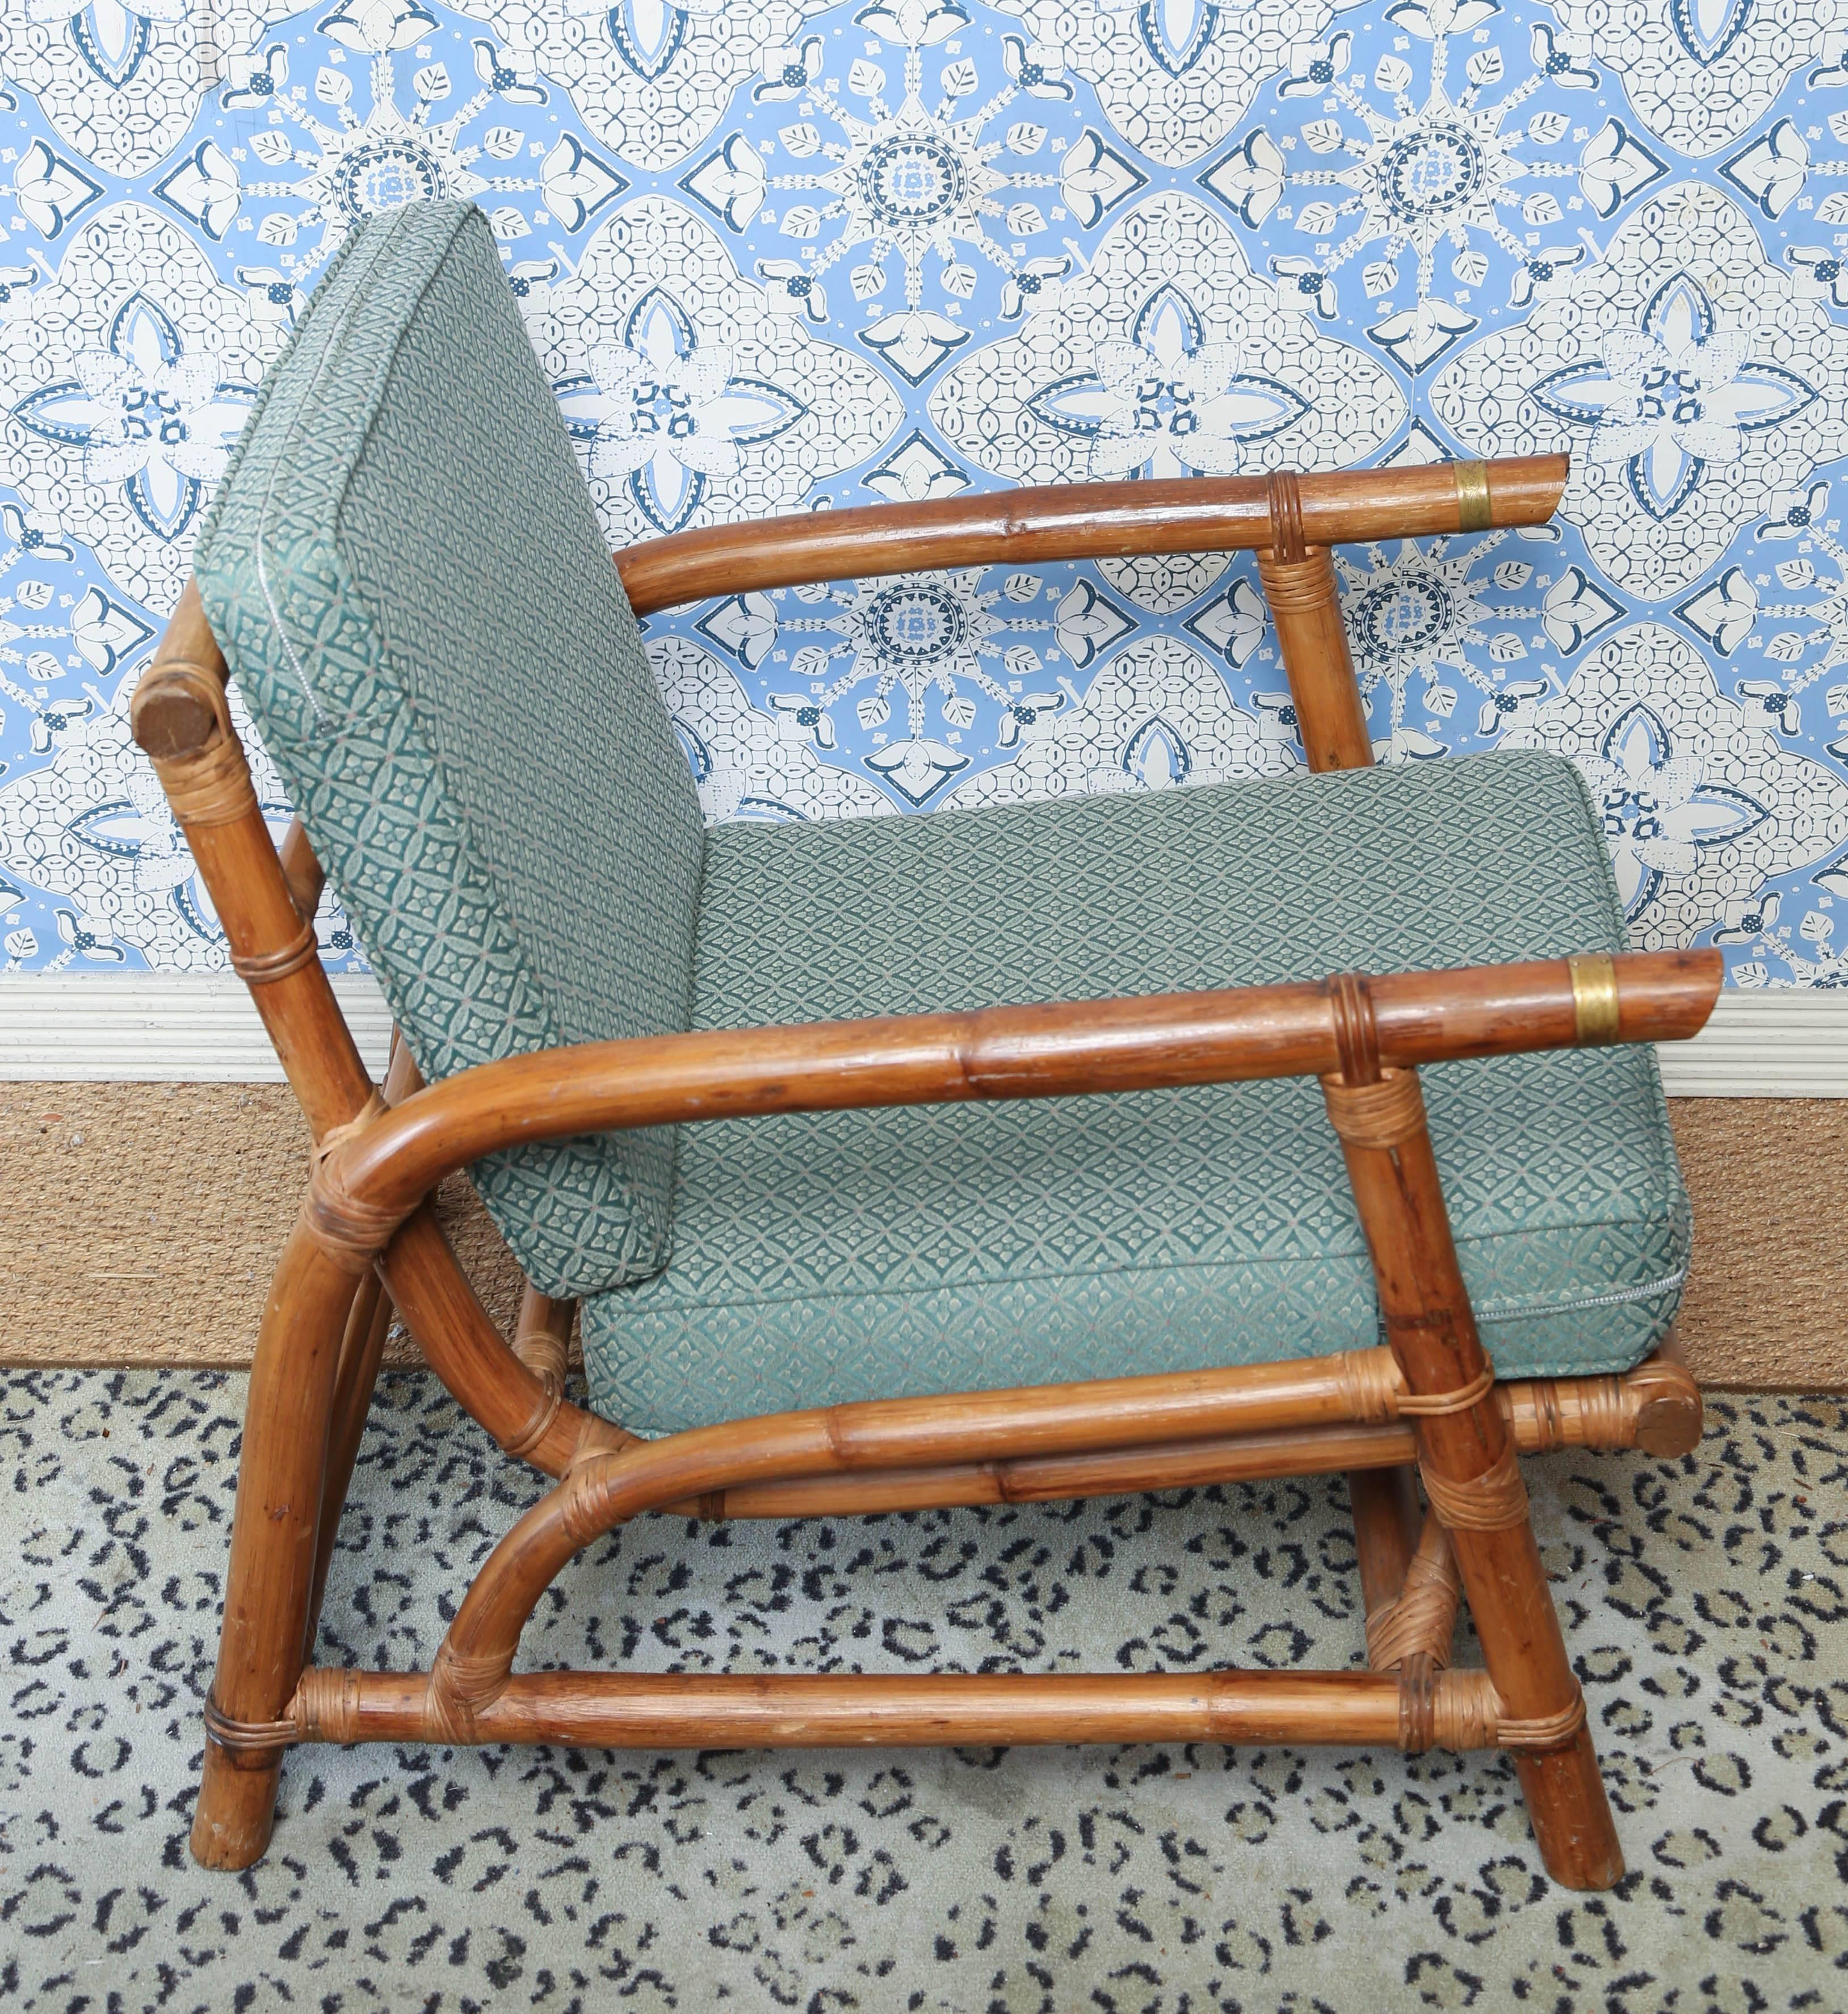 20th Century Superb Vintage Four-Piece Bamboo and Rattan Seating Arrangement